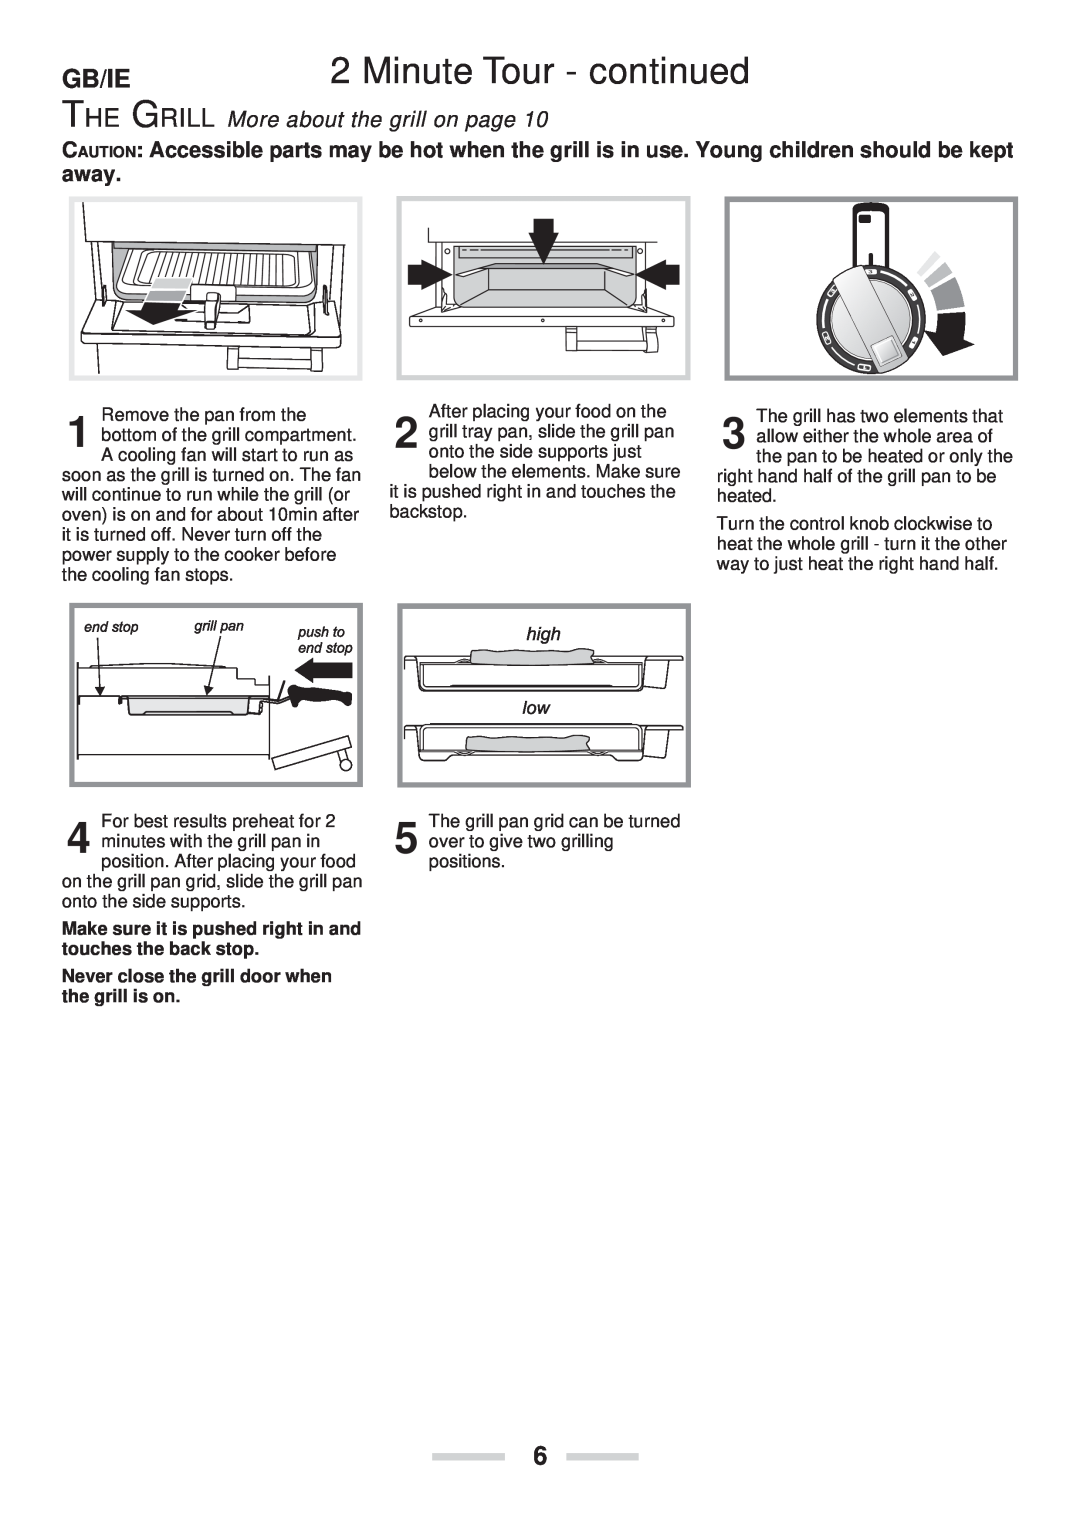 Rangemaster 90 Ceramic installation instructions Minute Tour - continued, Gb/Ie, THE GRILL More about the grill on page 